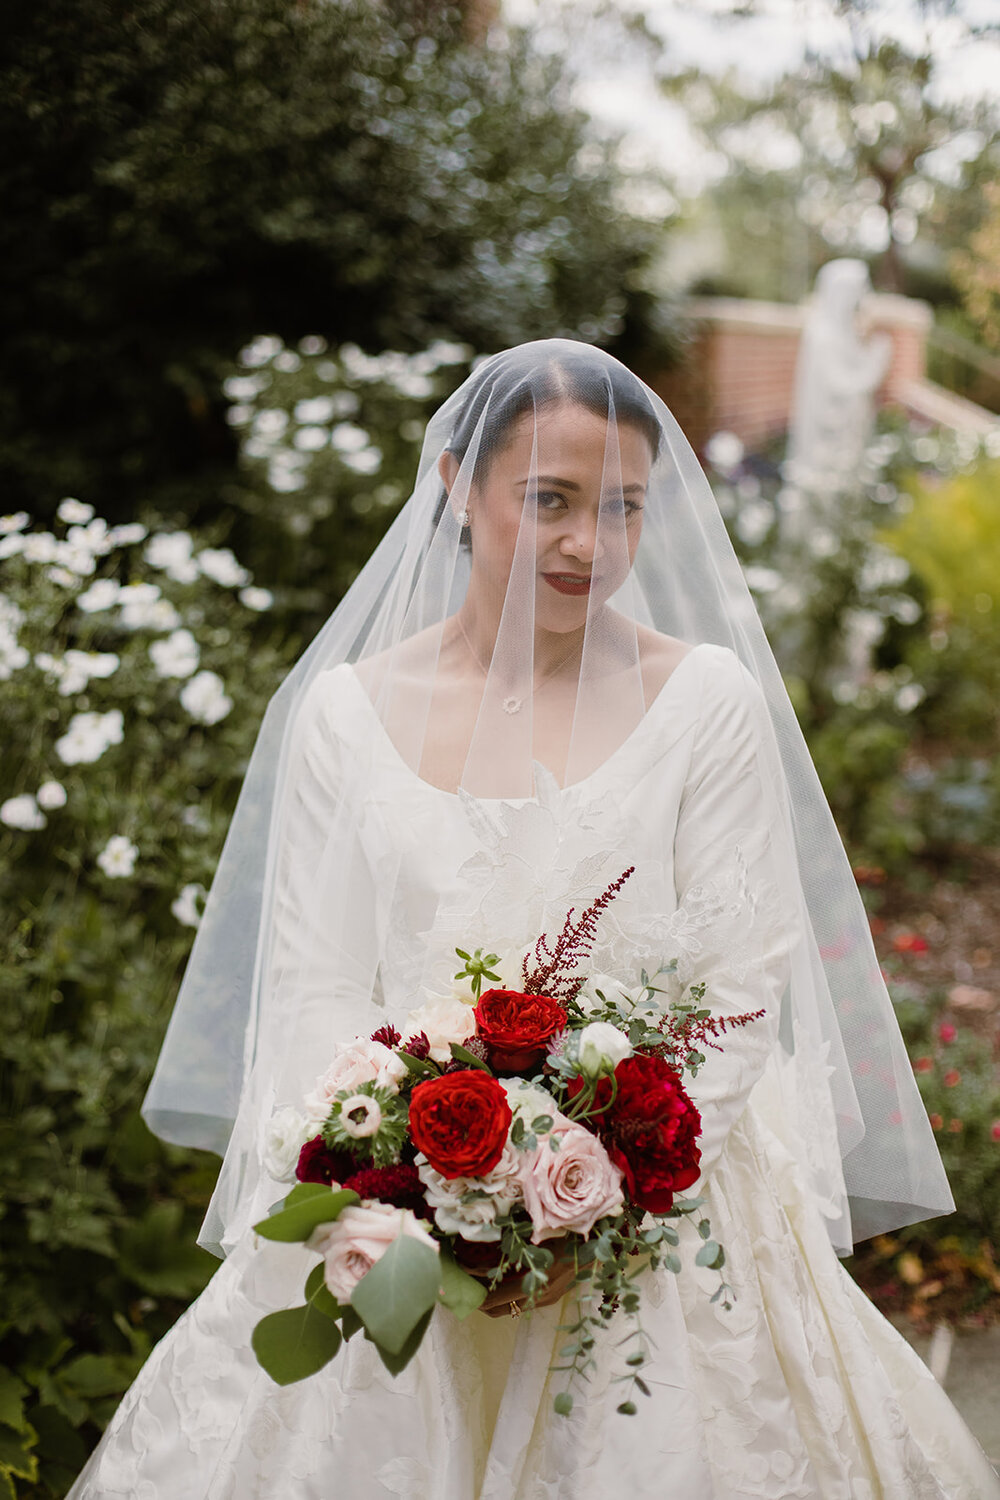 Bride and Groom Portraits | Romantic wedding at St. Bridget Catholic Church, Richmond, VA | Black tie wedding with a red tux and custom Anne Barge gown